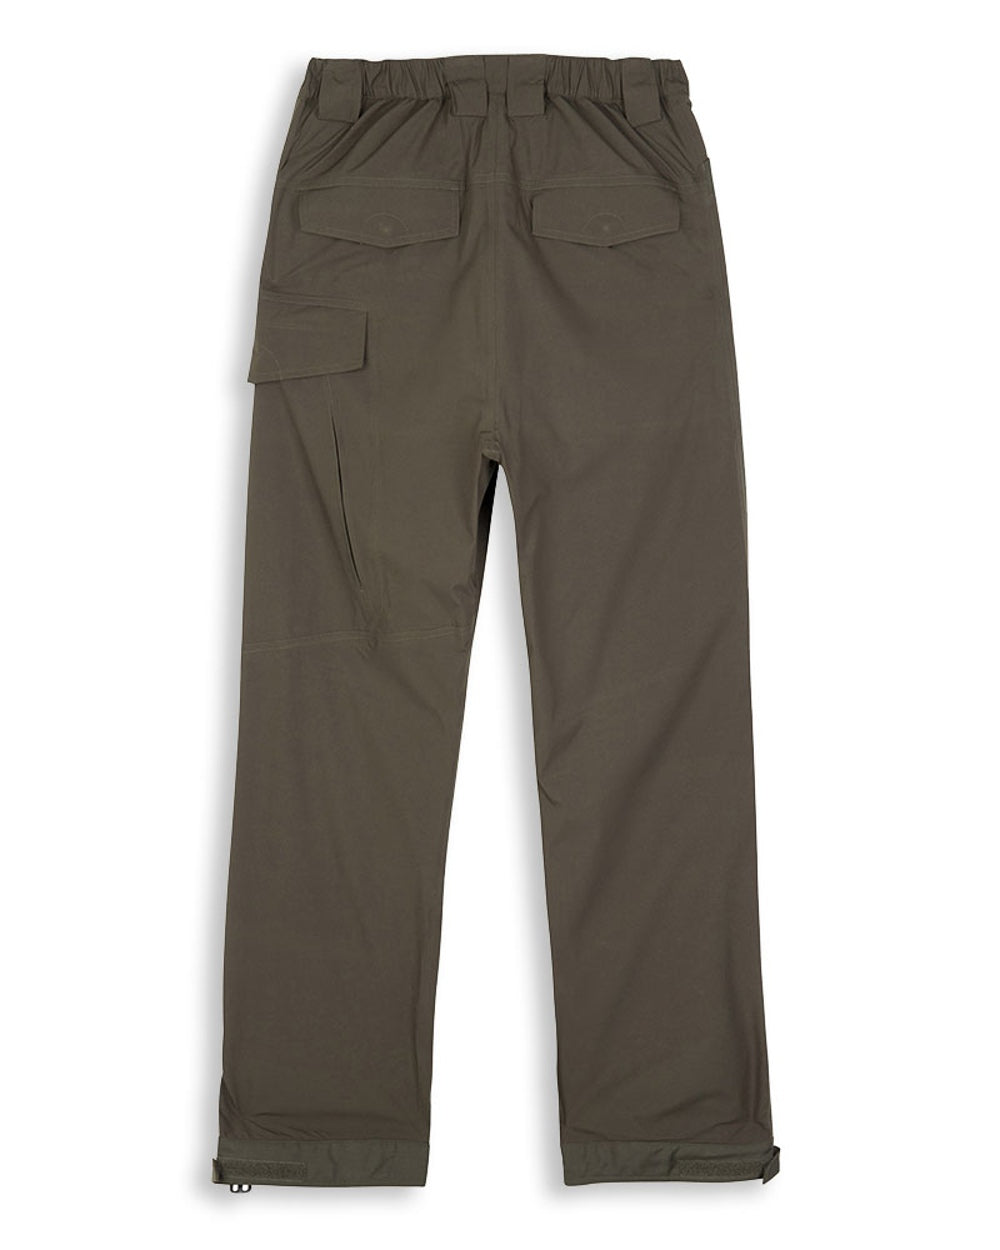 Green coloured Hoggs of Fife Culloden Waterproof Trousers on white background